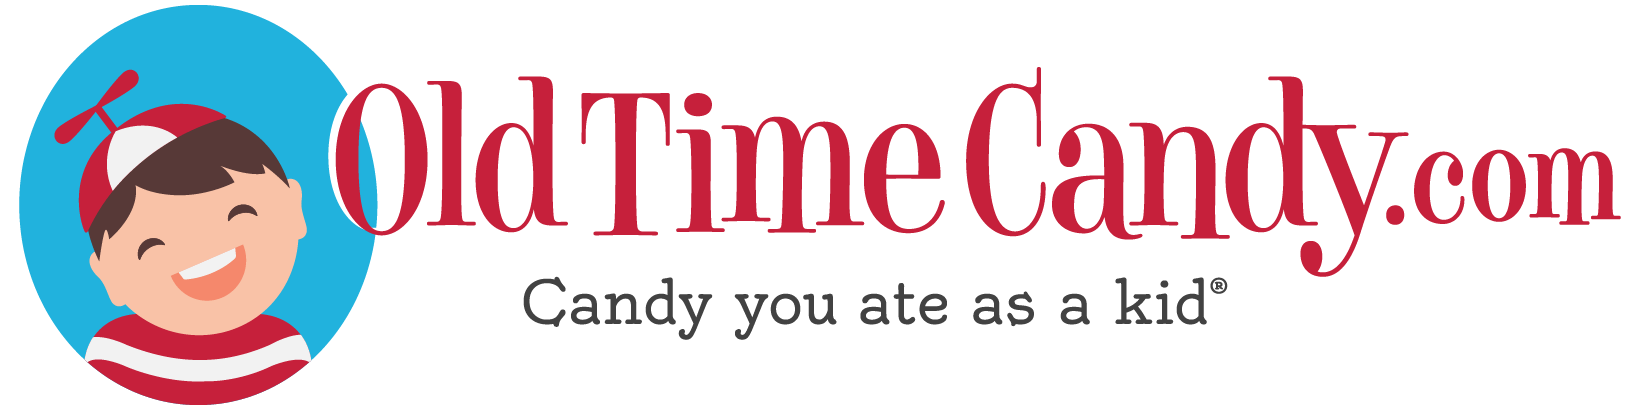 Old Time Candy logo